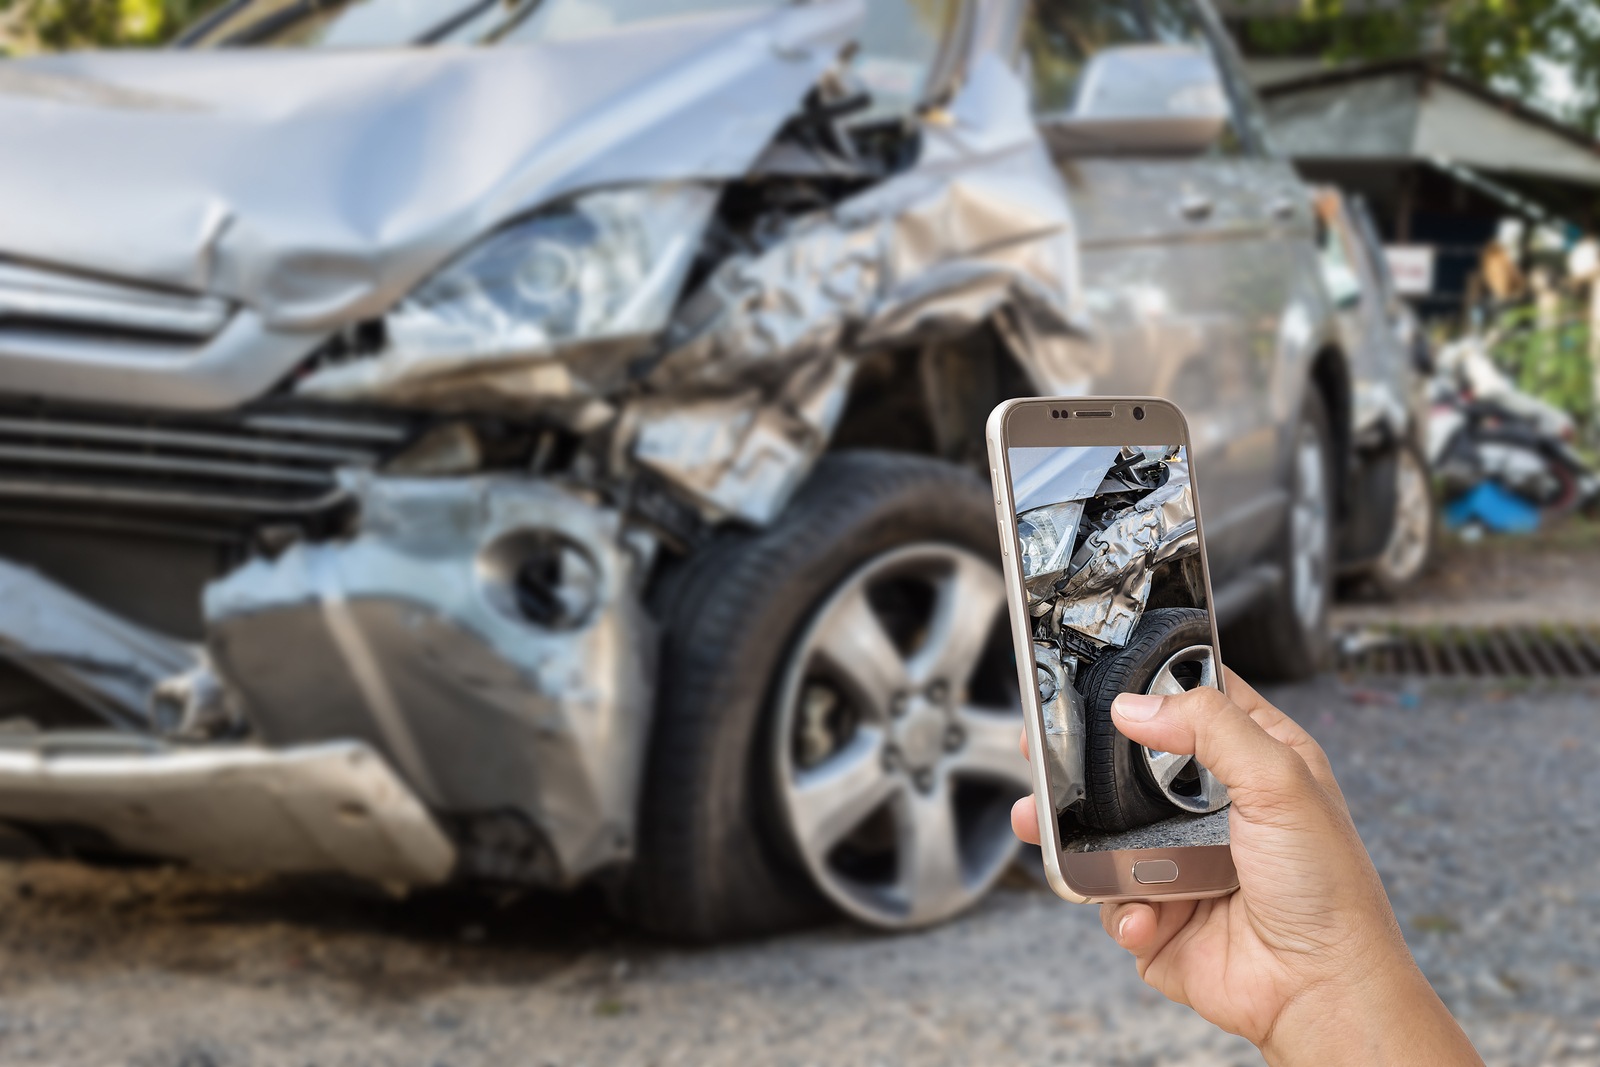 Car Insurance Claim Denied? (Here’s What You Need To Do)